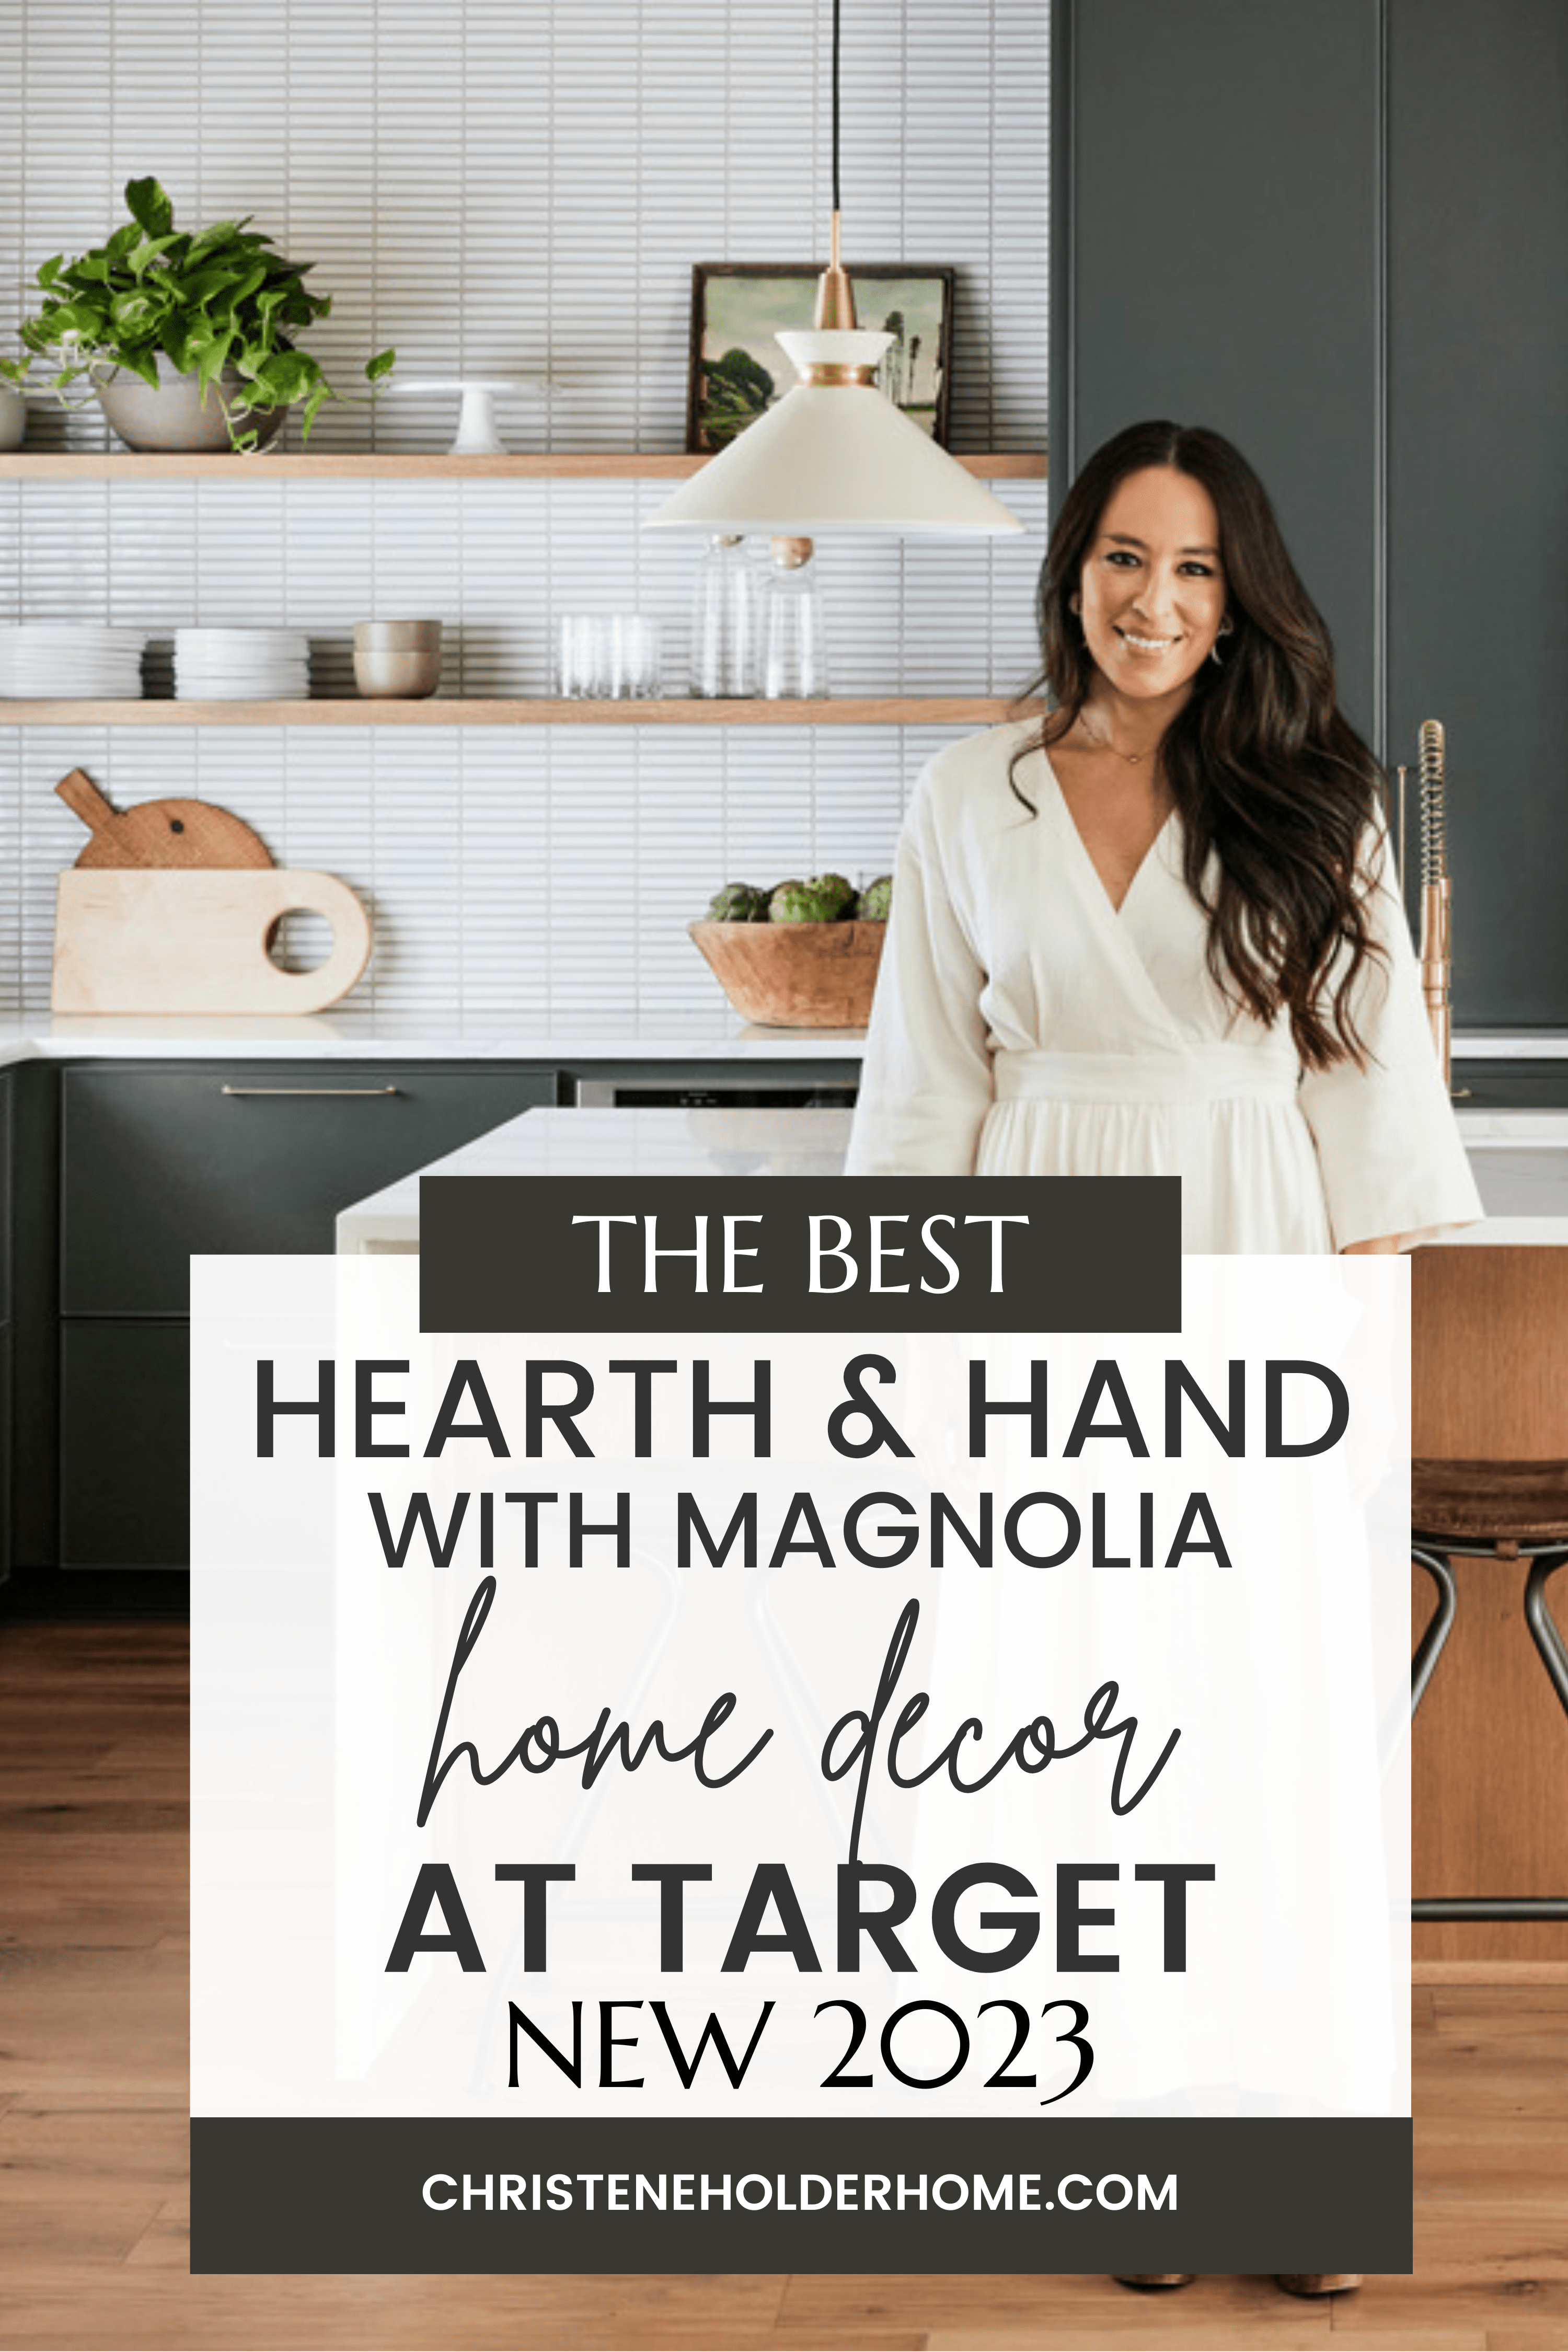 the best hearth and hand with magnolia home decor at target new 2023